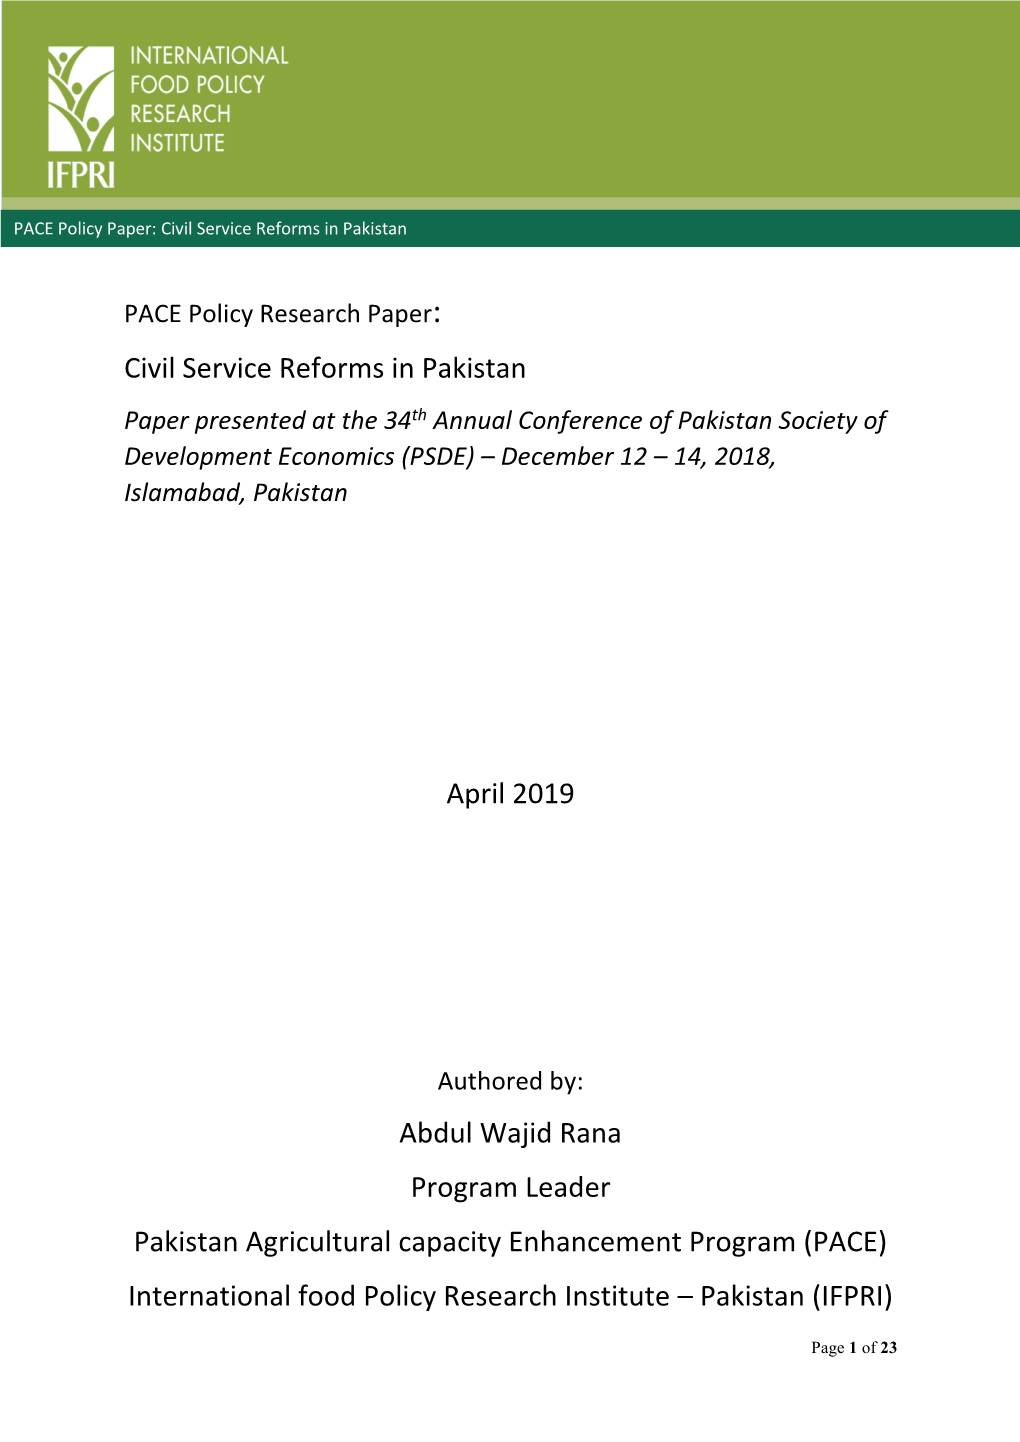 PACE Policy Research Paper